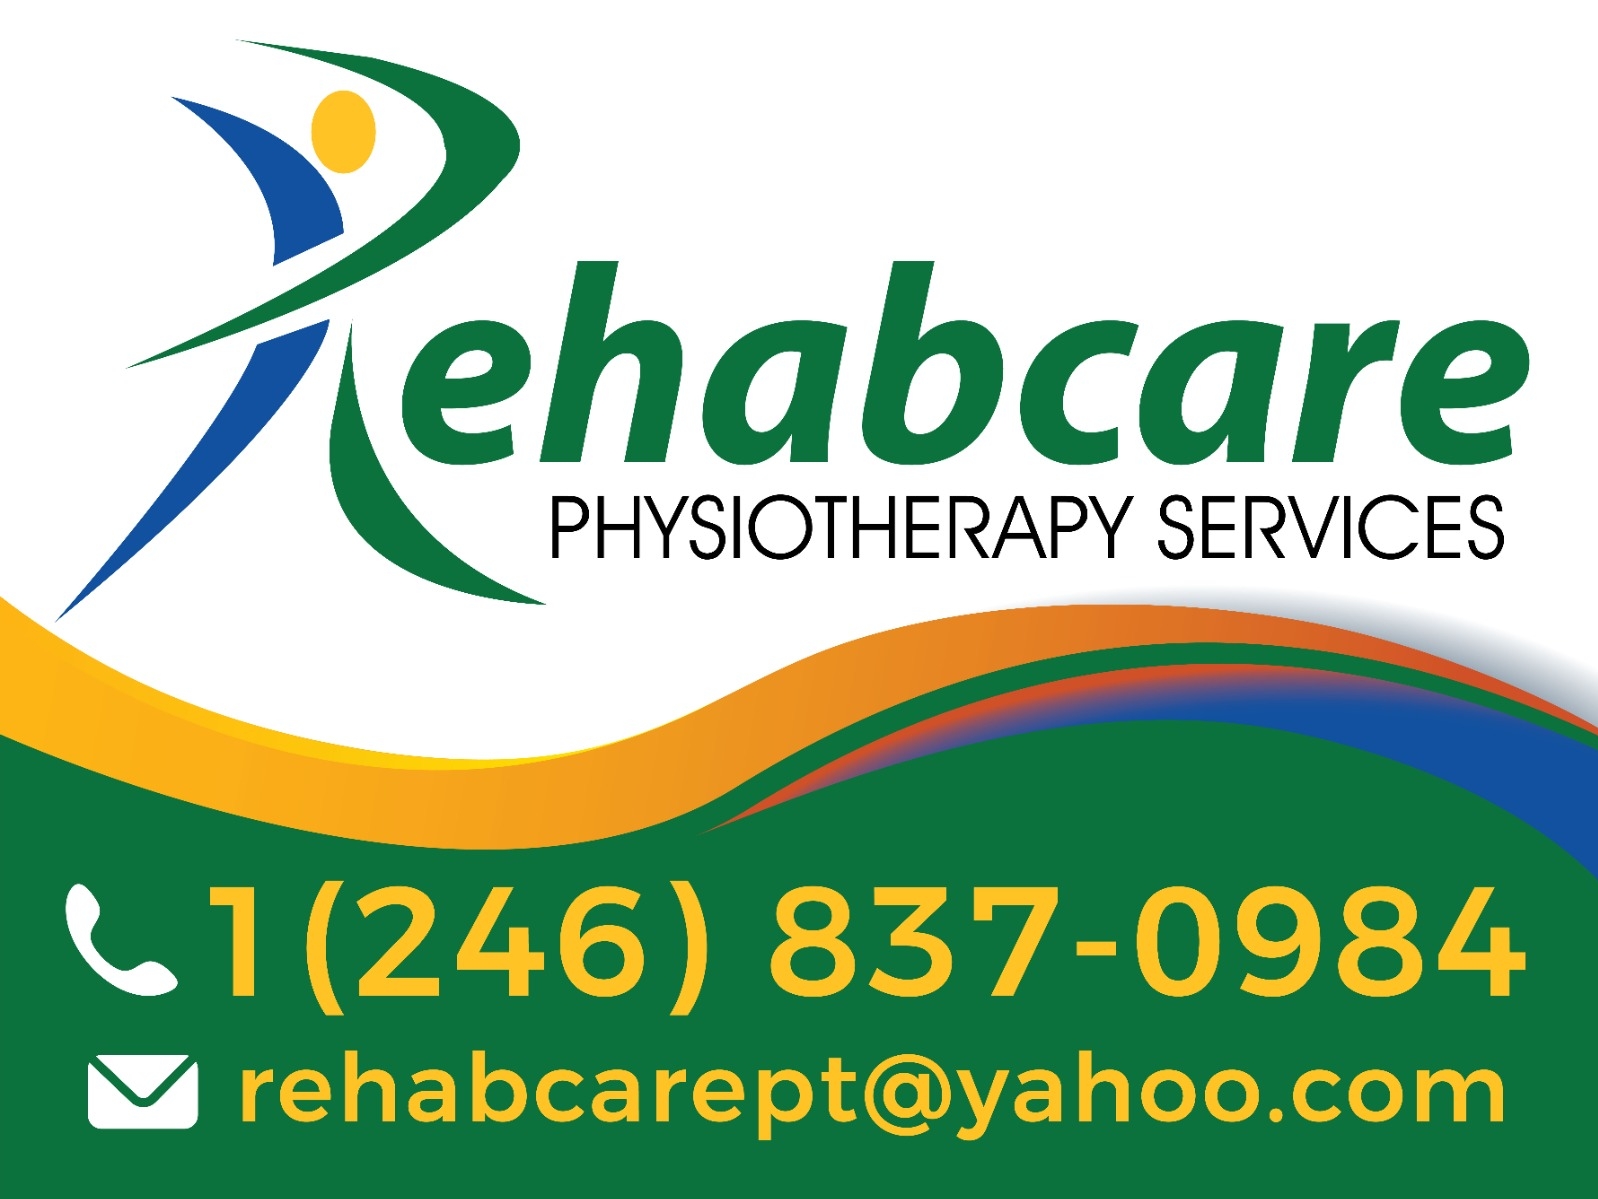 Rehabcare Physiotherapy Services - Physical Therapists